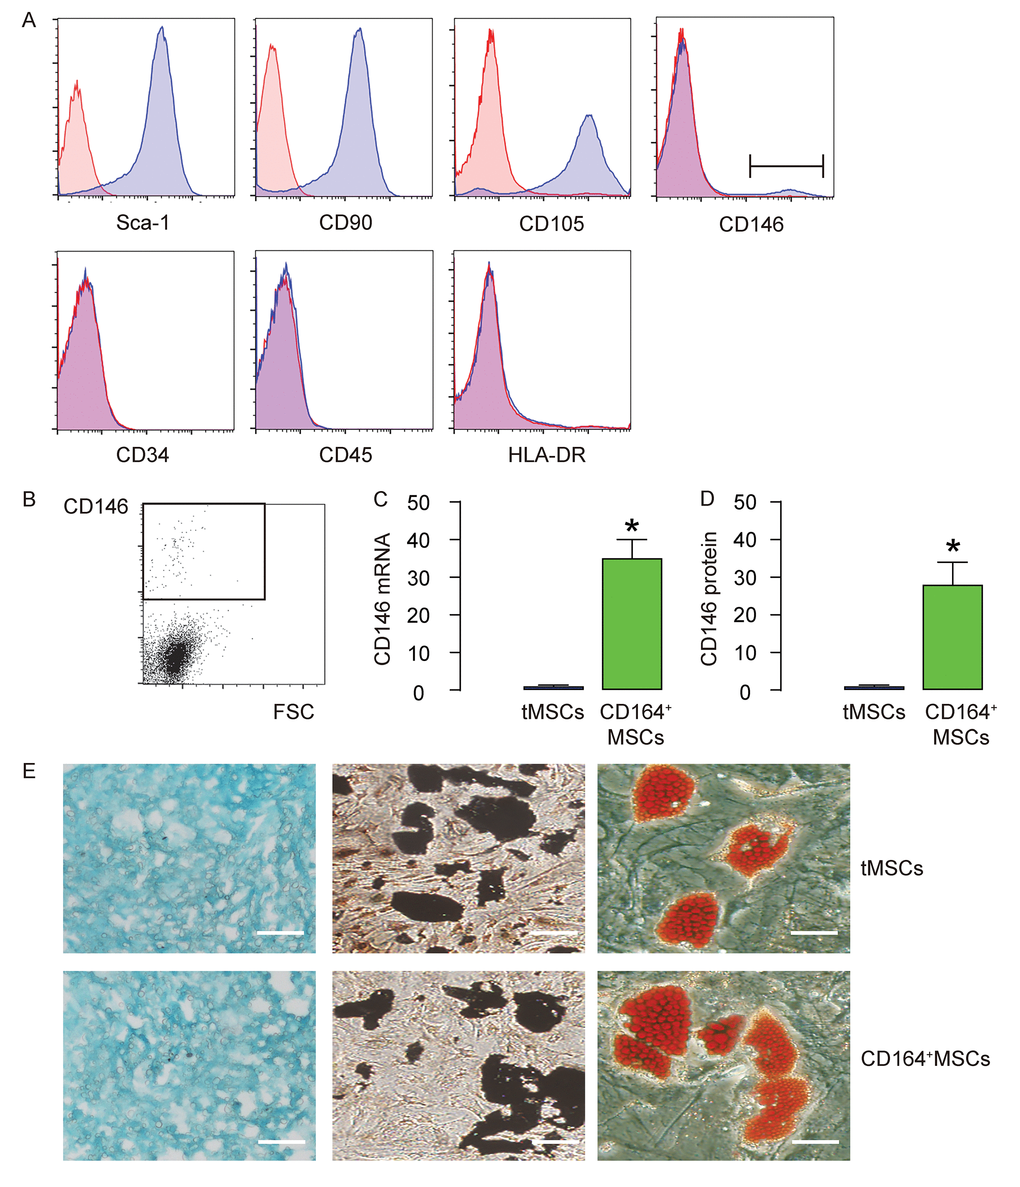 CD146+MSCs represent a small population of total tMSCs. (A) The surface markers for mouse MSCs (Sca-1, CD105, CD90 CD45, CD34, HLA-DR and CD146) were examined. (B) FAC sorting of CD146+ cells from tMSCs. (C-D) RT-qPCR (C) and ELISA (D) for CD146 in CD146+MSCs and tMSCs. (E) Differentiation assay for tMSCs and CD146+MSCs into chondrocytes followed by alcian blue staining (left), into osteocytes followed by Von kossa staining (middle), and into adipocytes followed by Oil red O staining (right). *p